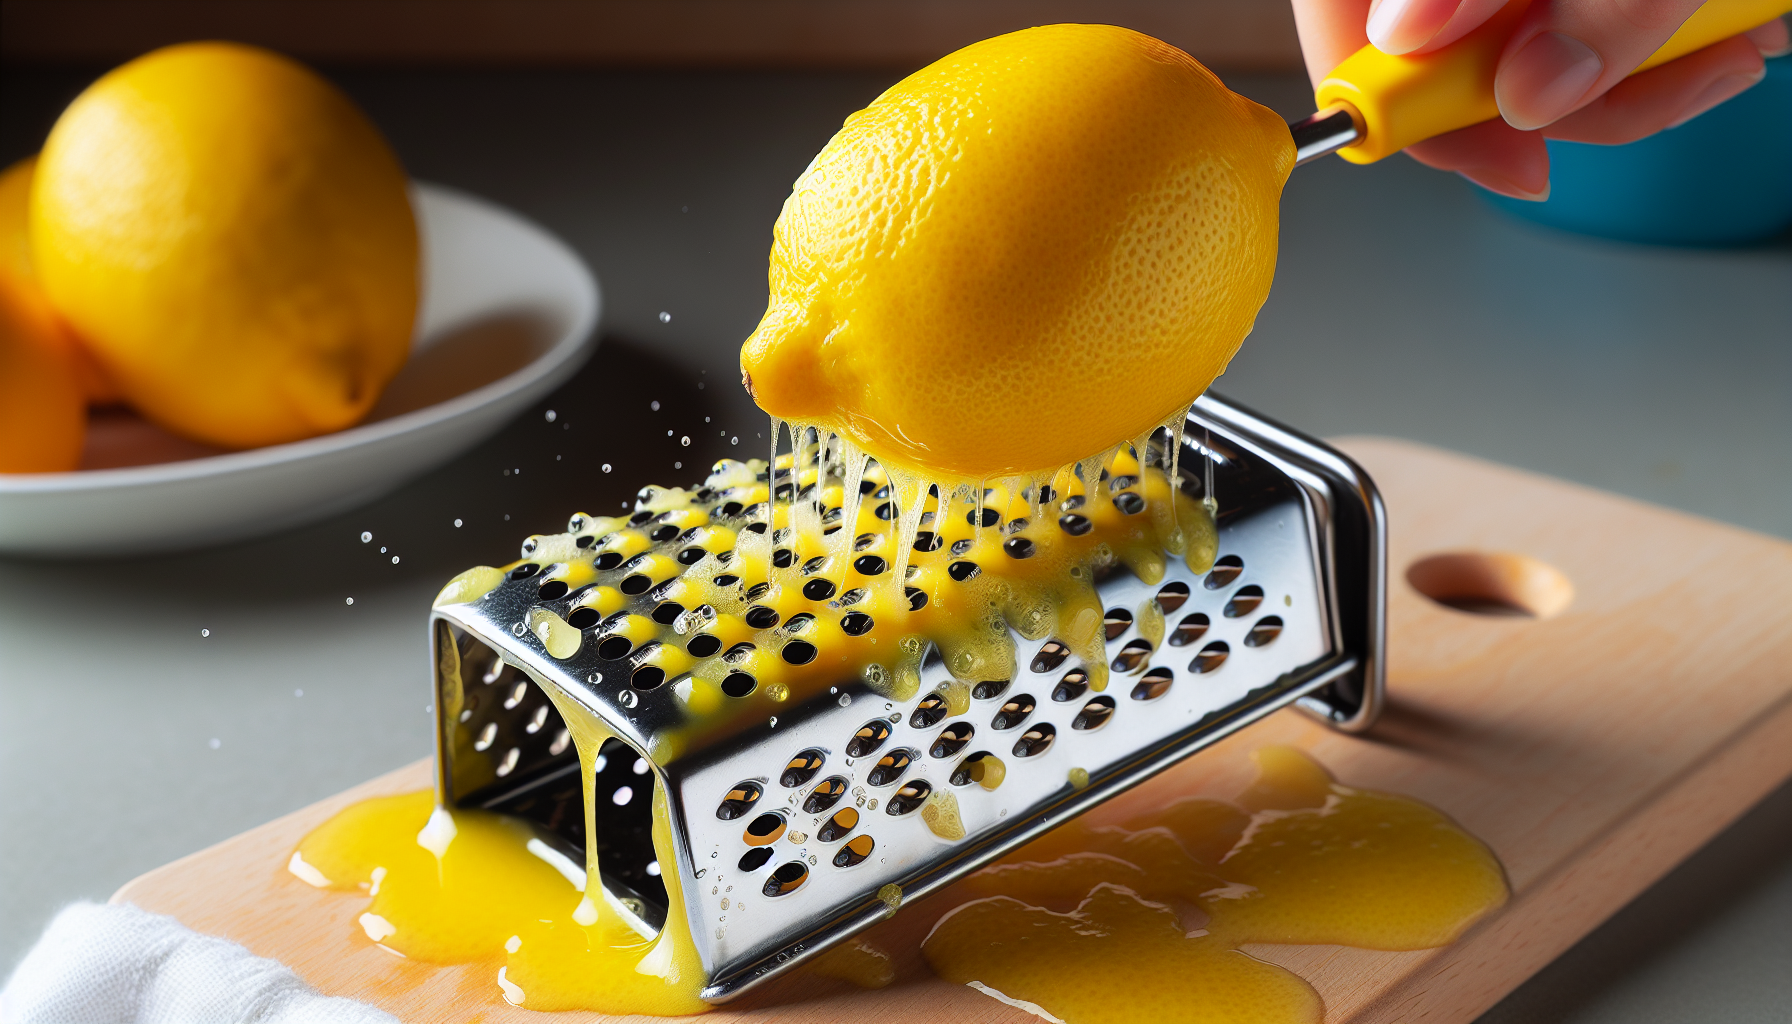 Discover the revolutionary kitchen cleaning hack with a lemon for your cheese grater